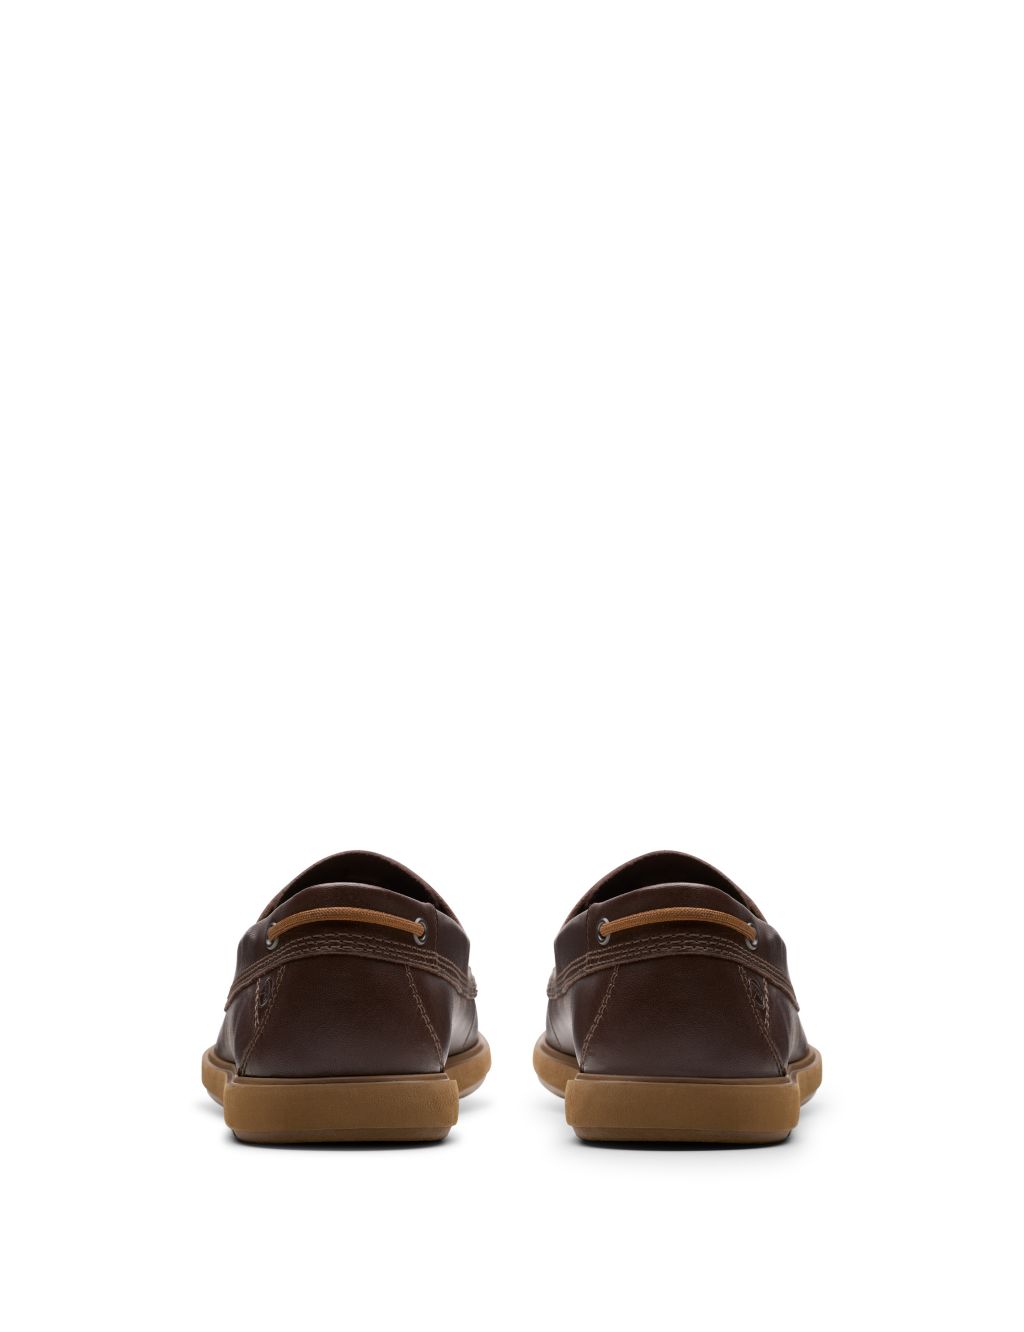 Leather Flat Boat Shoes 5 of 6